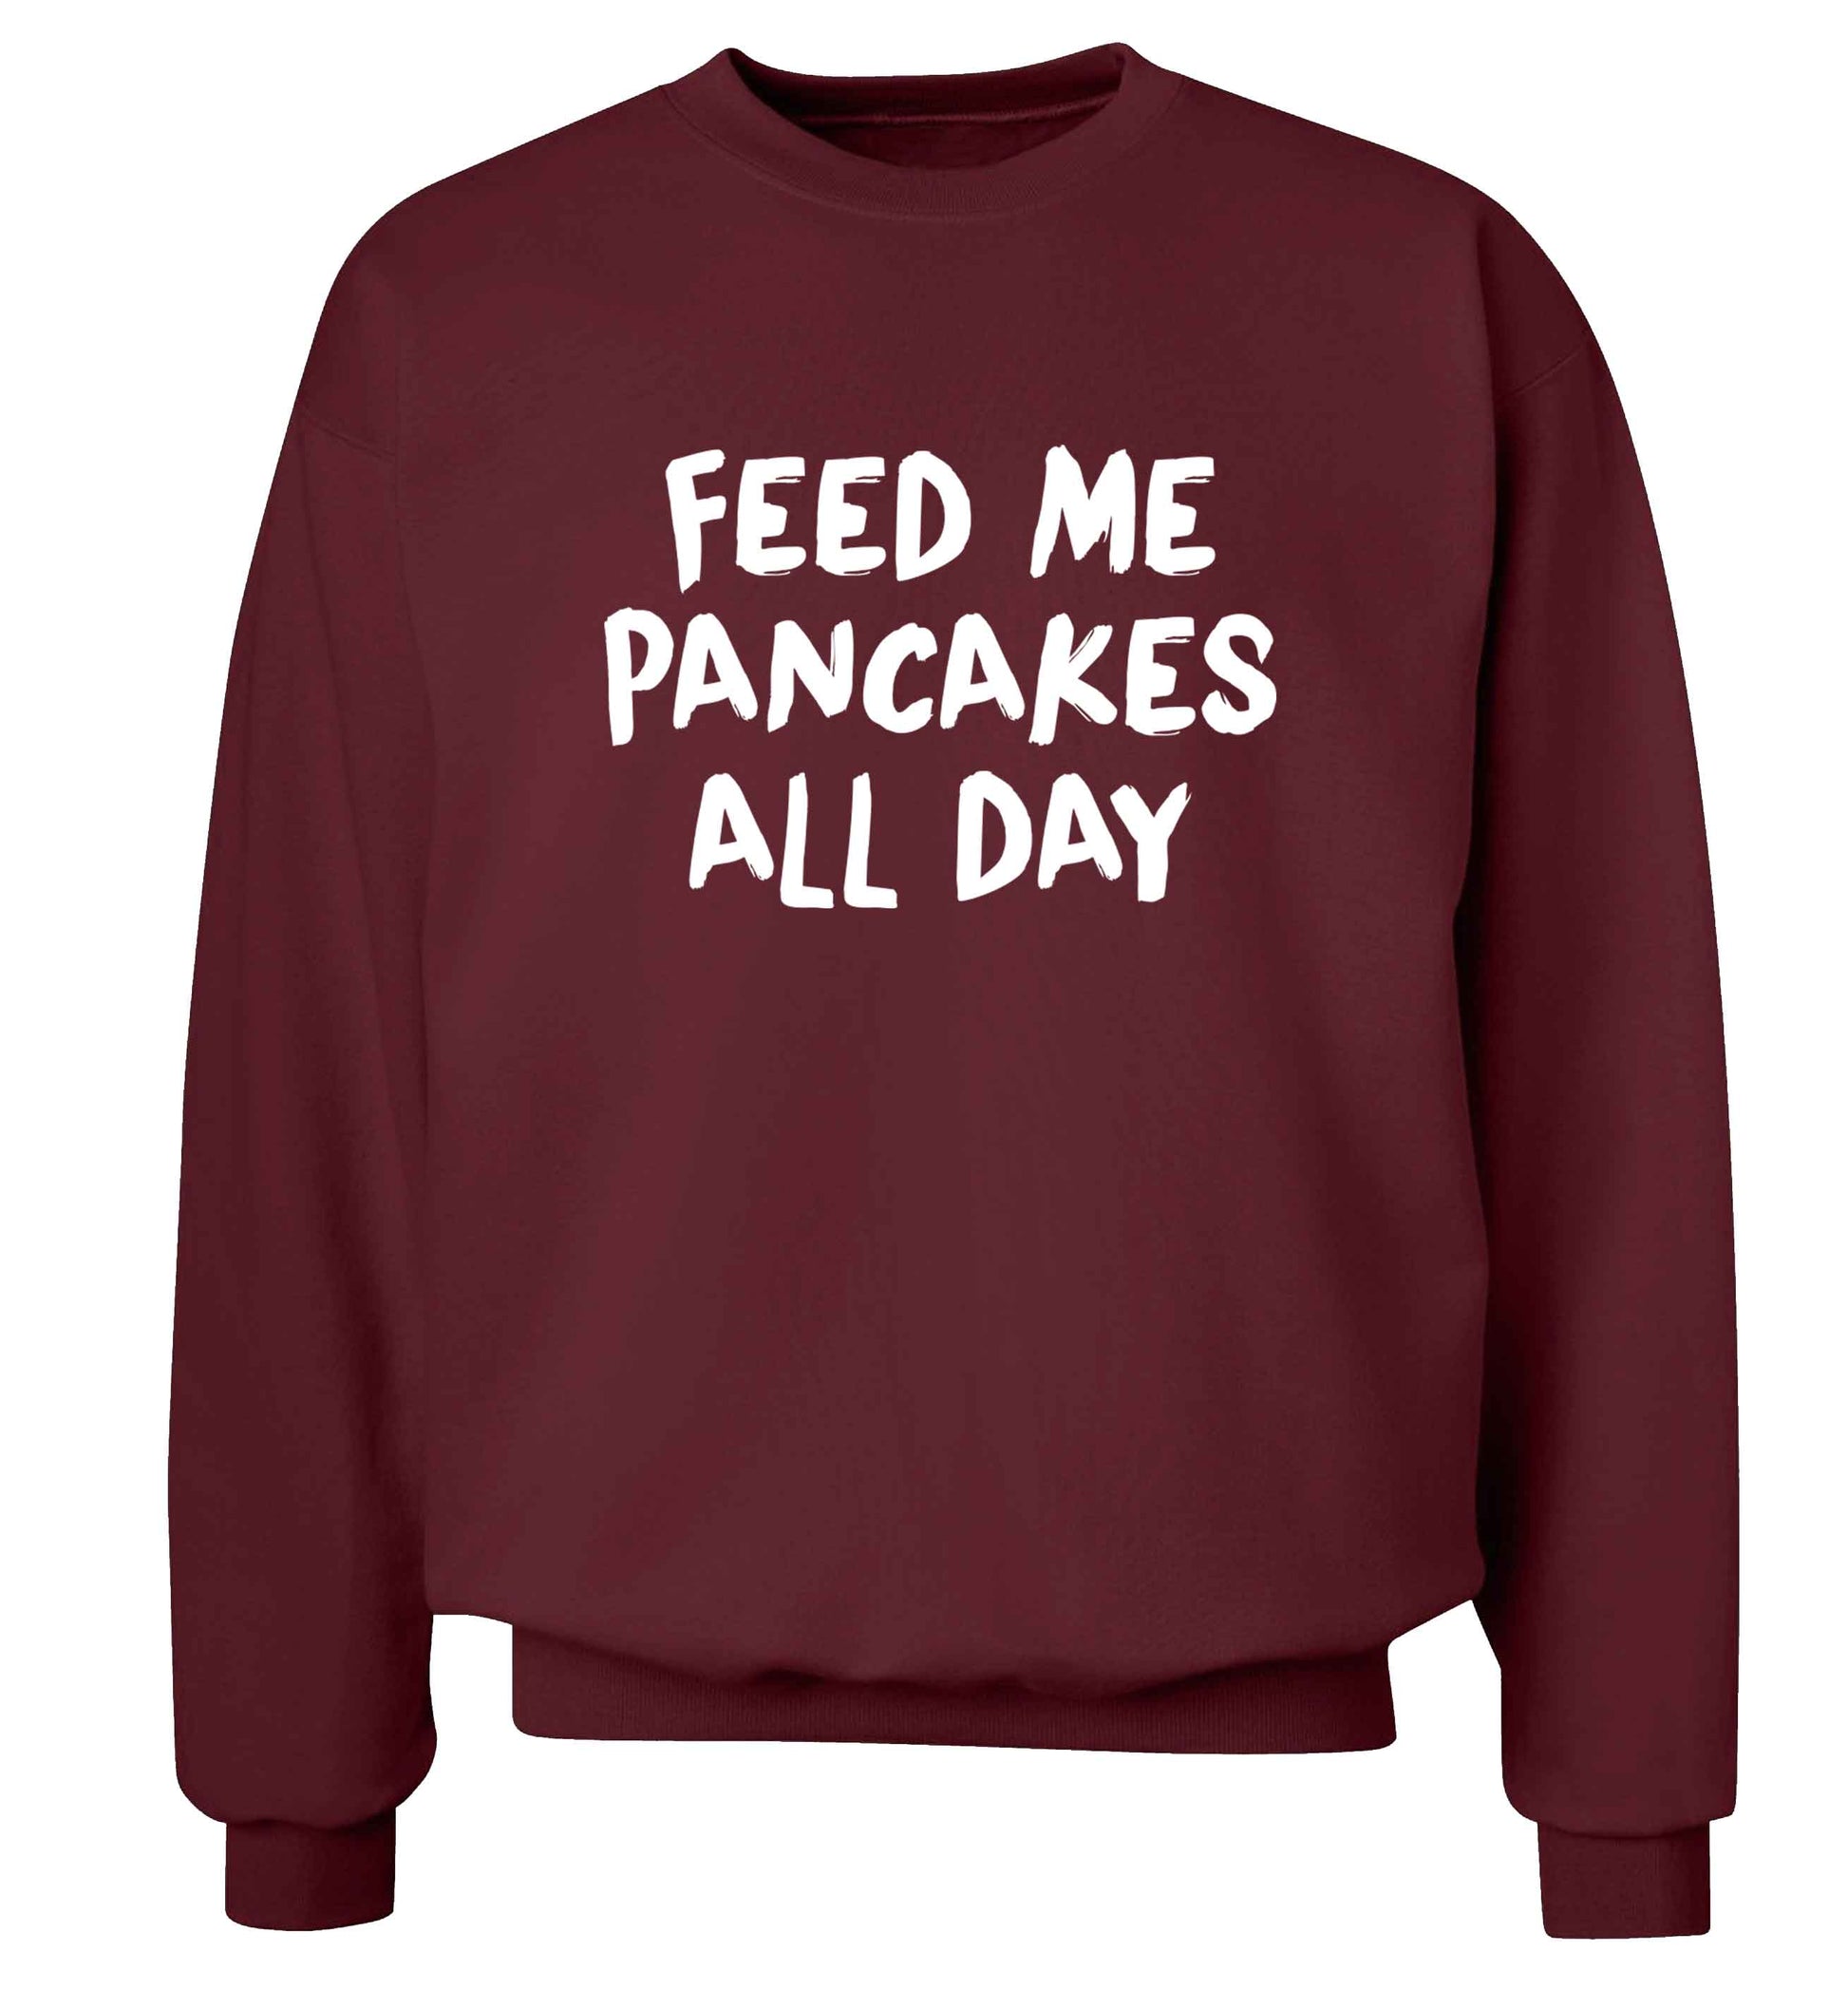 Feed me pancakes all day adult's unisex maroon sweater 2XL